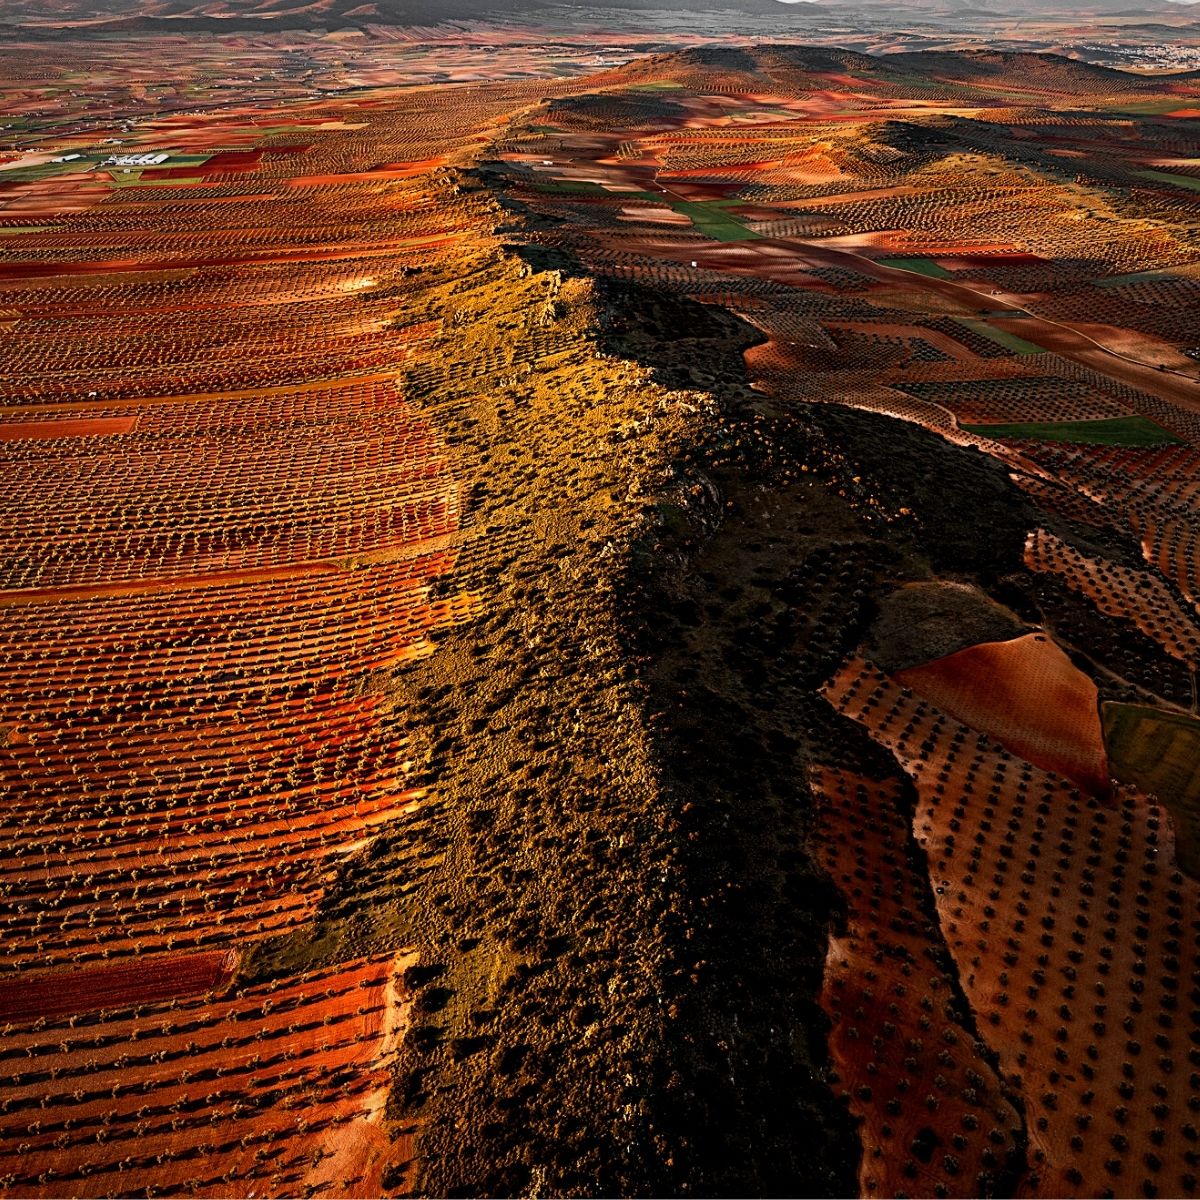 Tom Hegen pictures Spain countryside olive groves